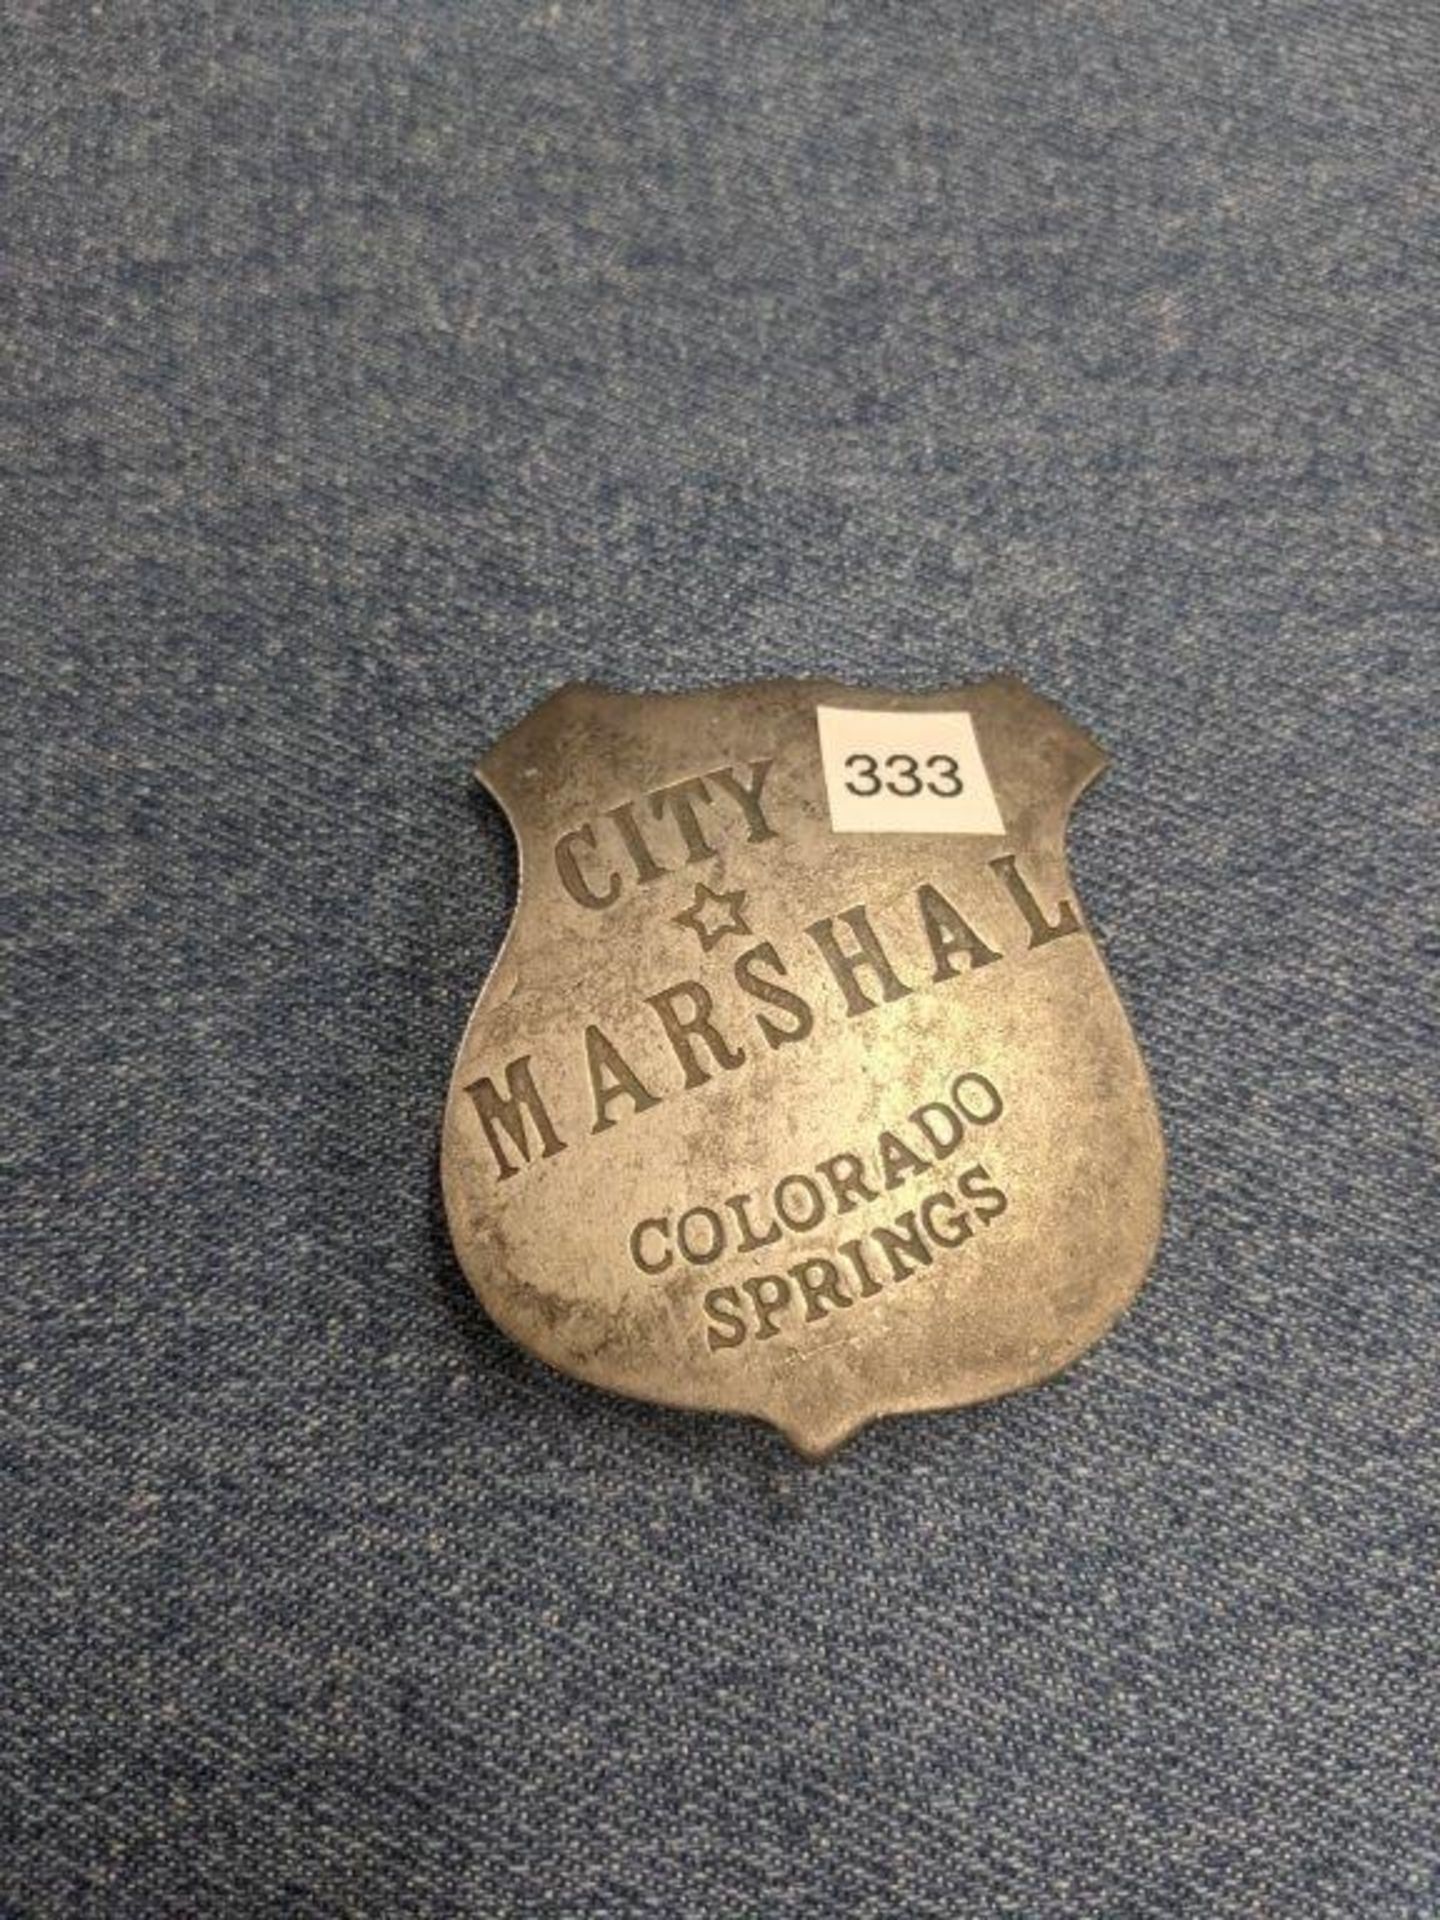 ANTIQUE SILVER MARSHALL BADGE - "COLORADO SPRINGS" - Image 2 of 6